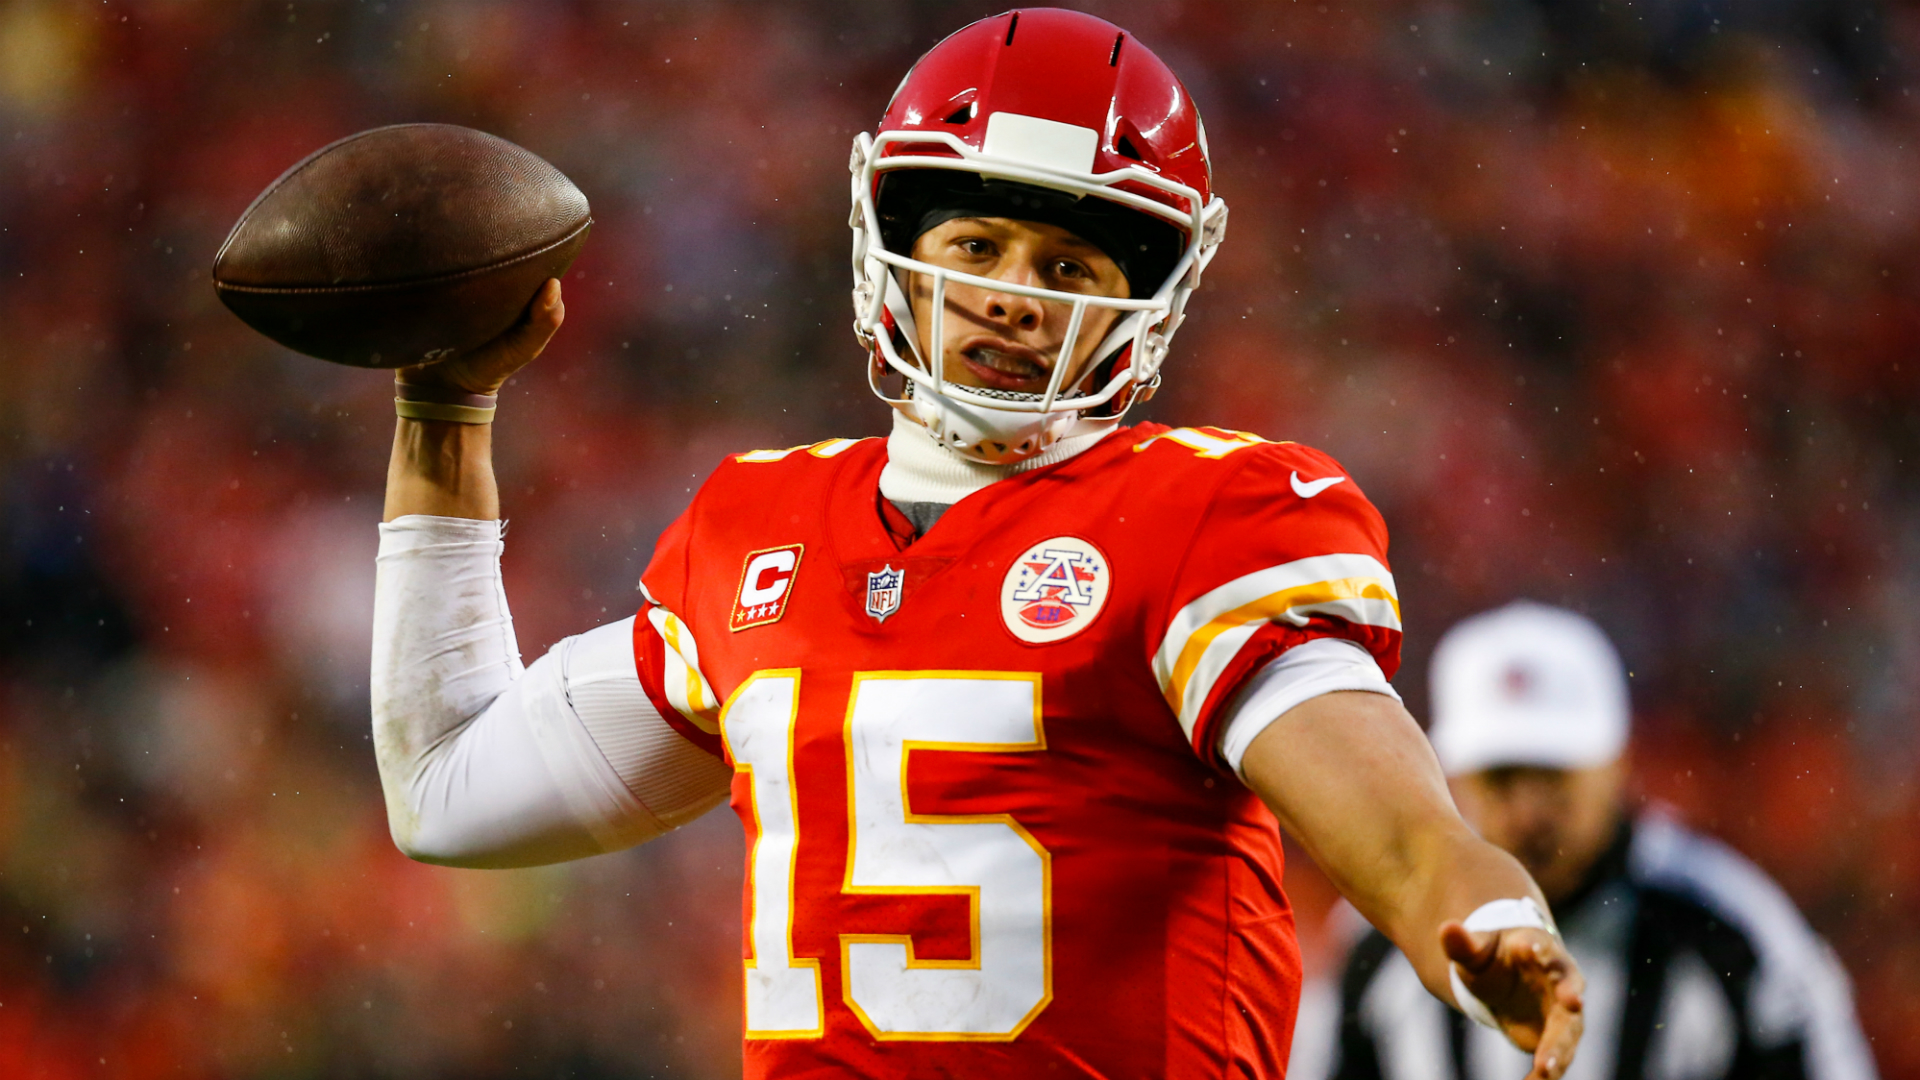 Patrick Mahomes plays 1 drive instead of 1 quarter after Chiefs' first touchdown